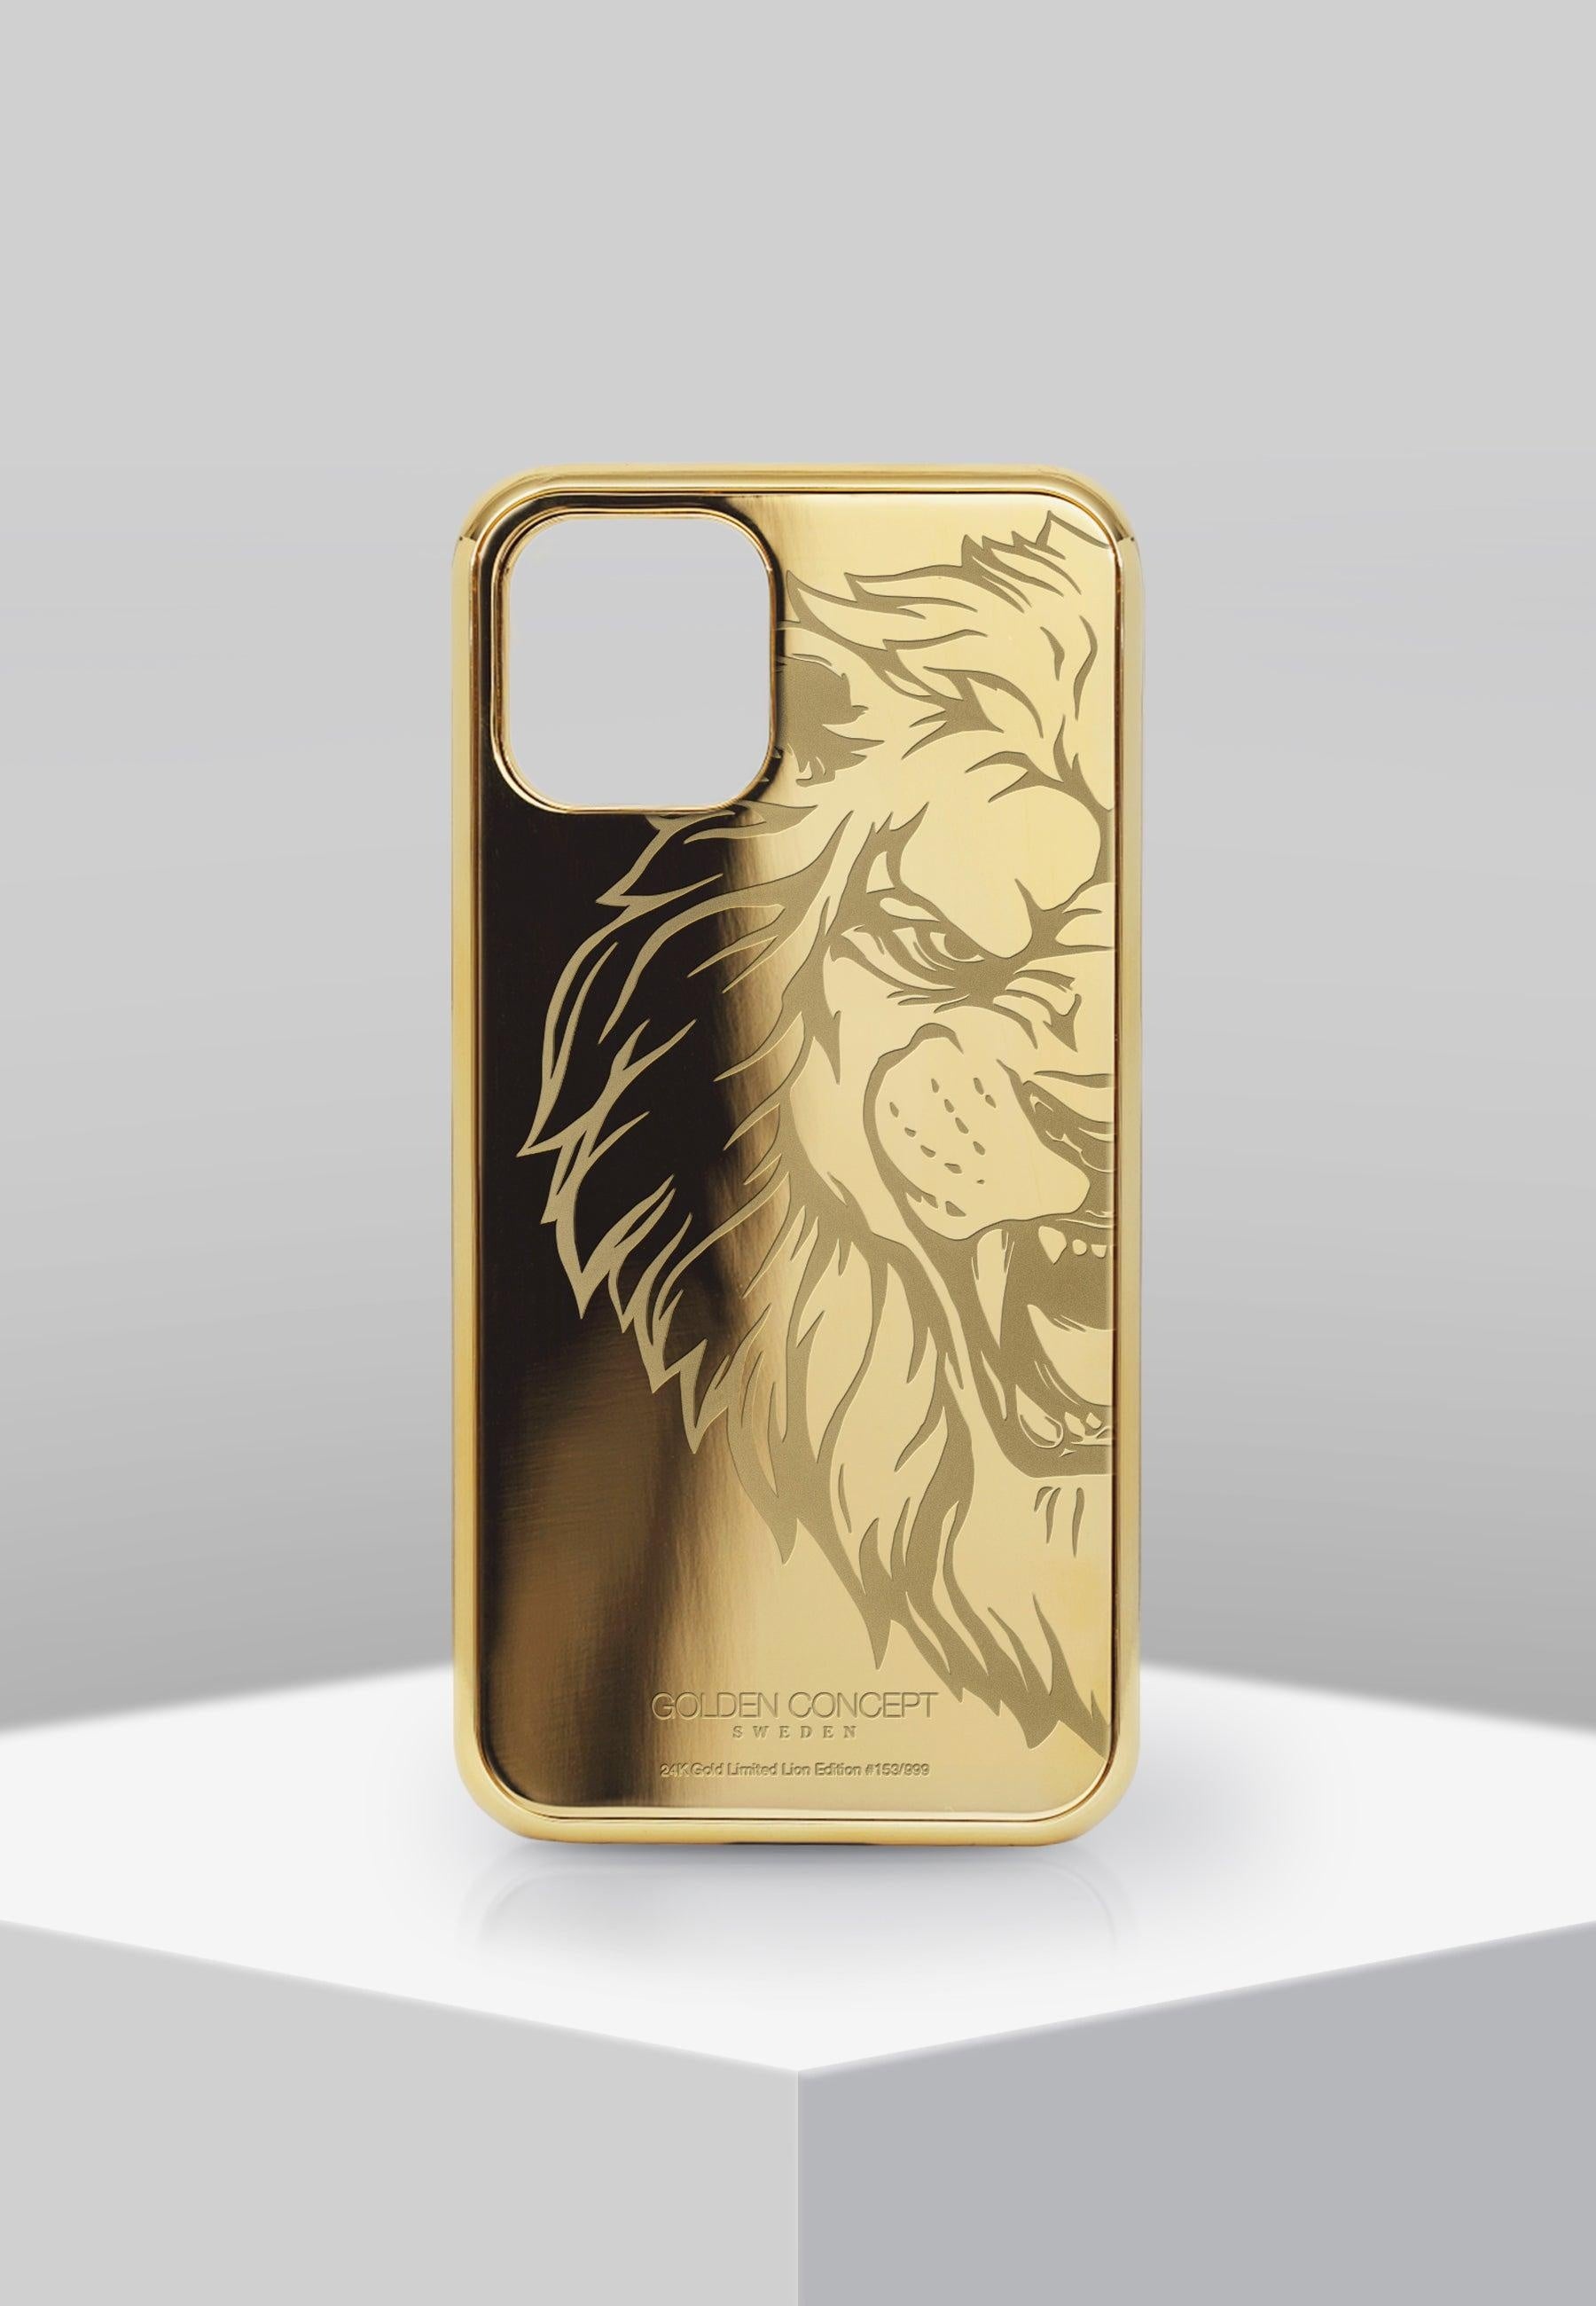 Buy Golden Concept Iphone 12 Pro Max Silver Limited Lion Edition Case Online